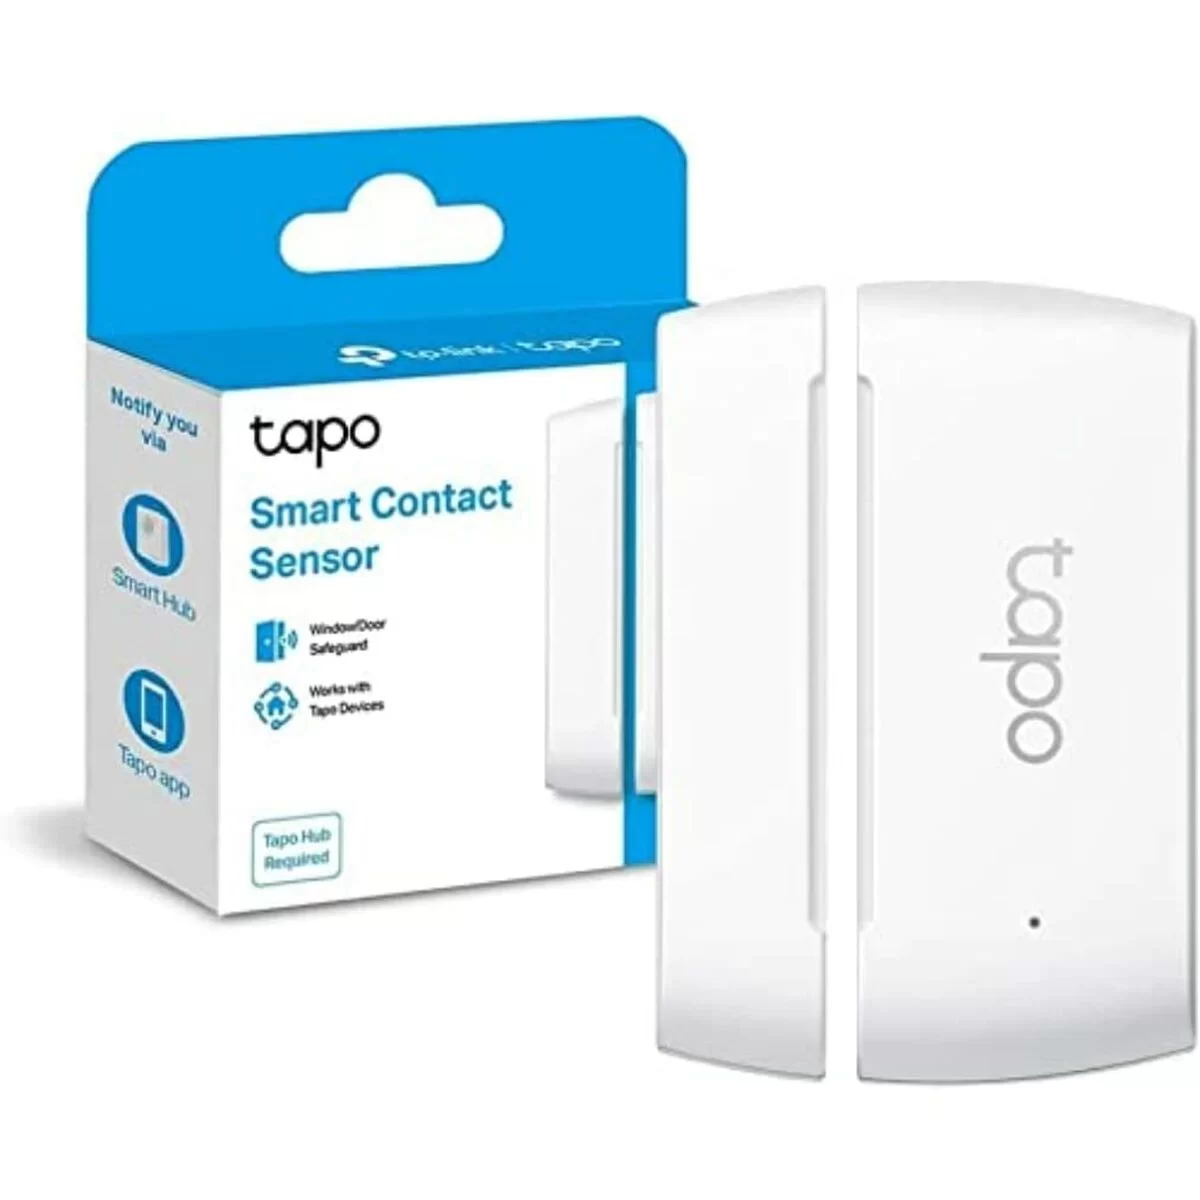 tp-link T110 Tapo Smart Contact Sensor User Guide